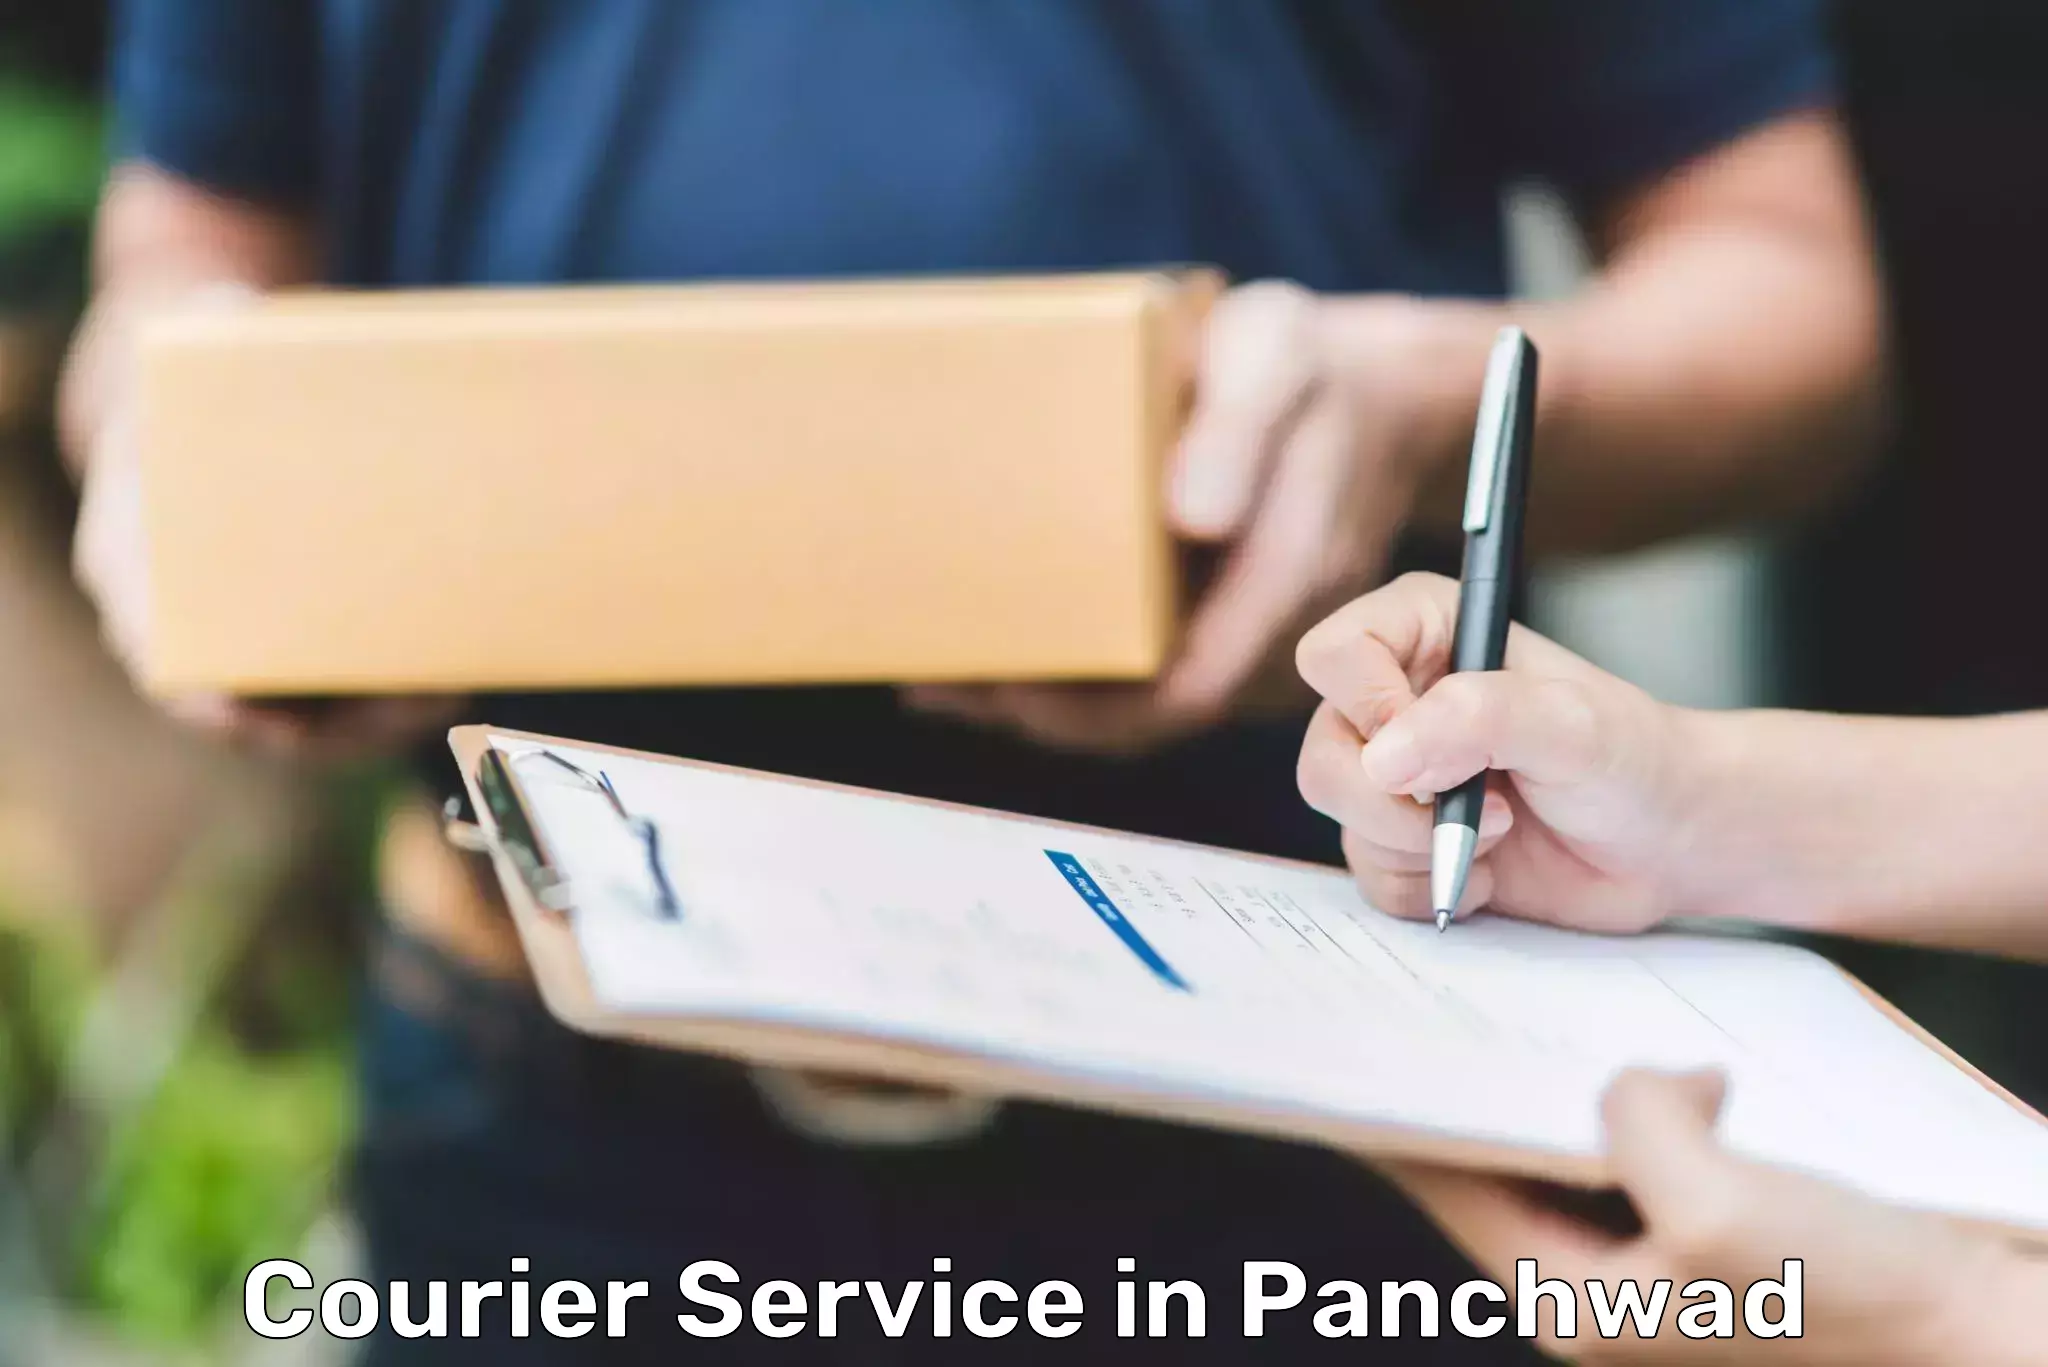 Customer-oriented courier services in Panchwad